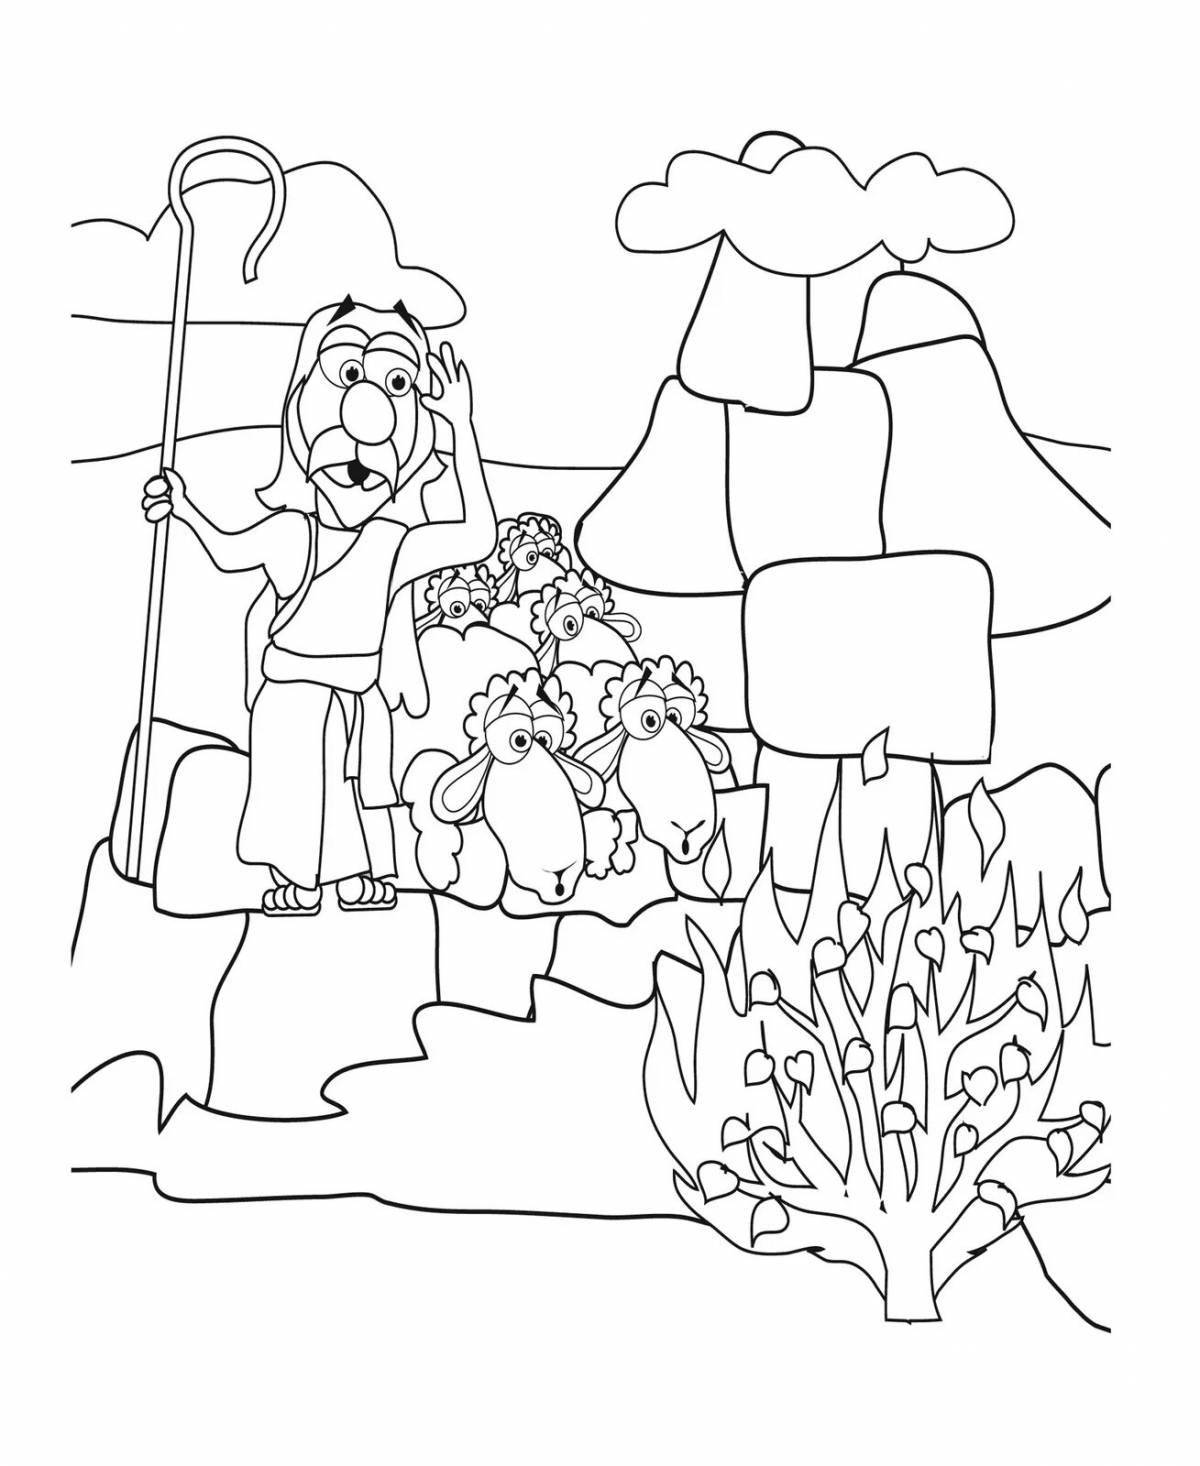 Bright flaming bush coloring book for kids